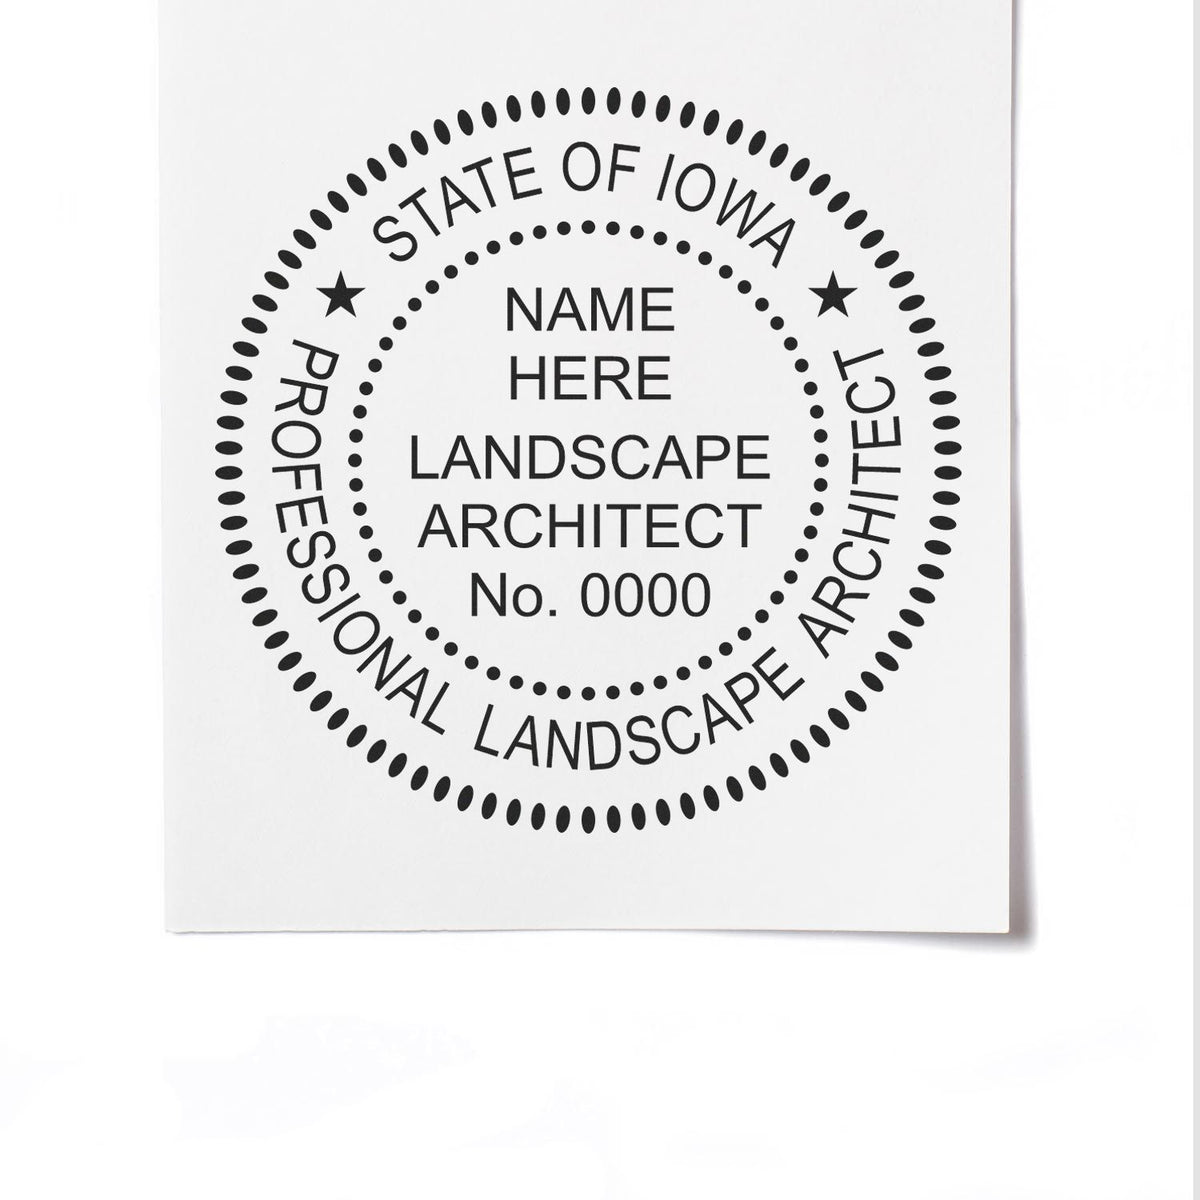 This paper is stamped with a sample imprint of the Premium MaxLight Pre-Inked Iowa Landscape Architectural Stamp, signifying its quality and reliability.